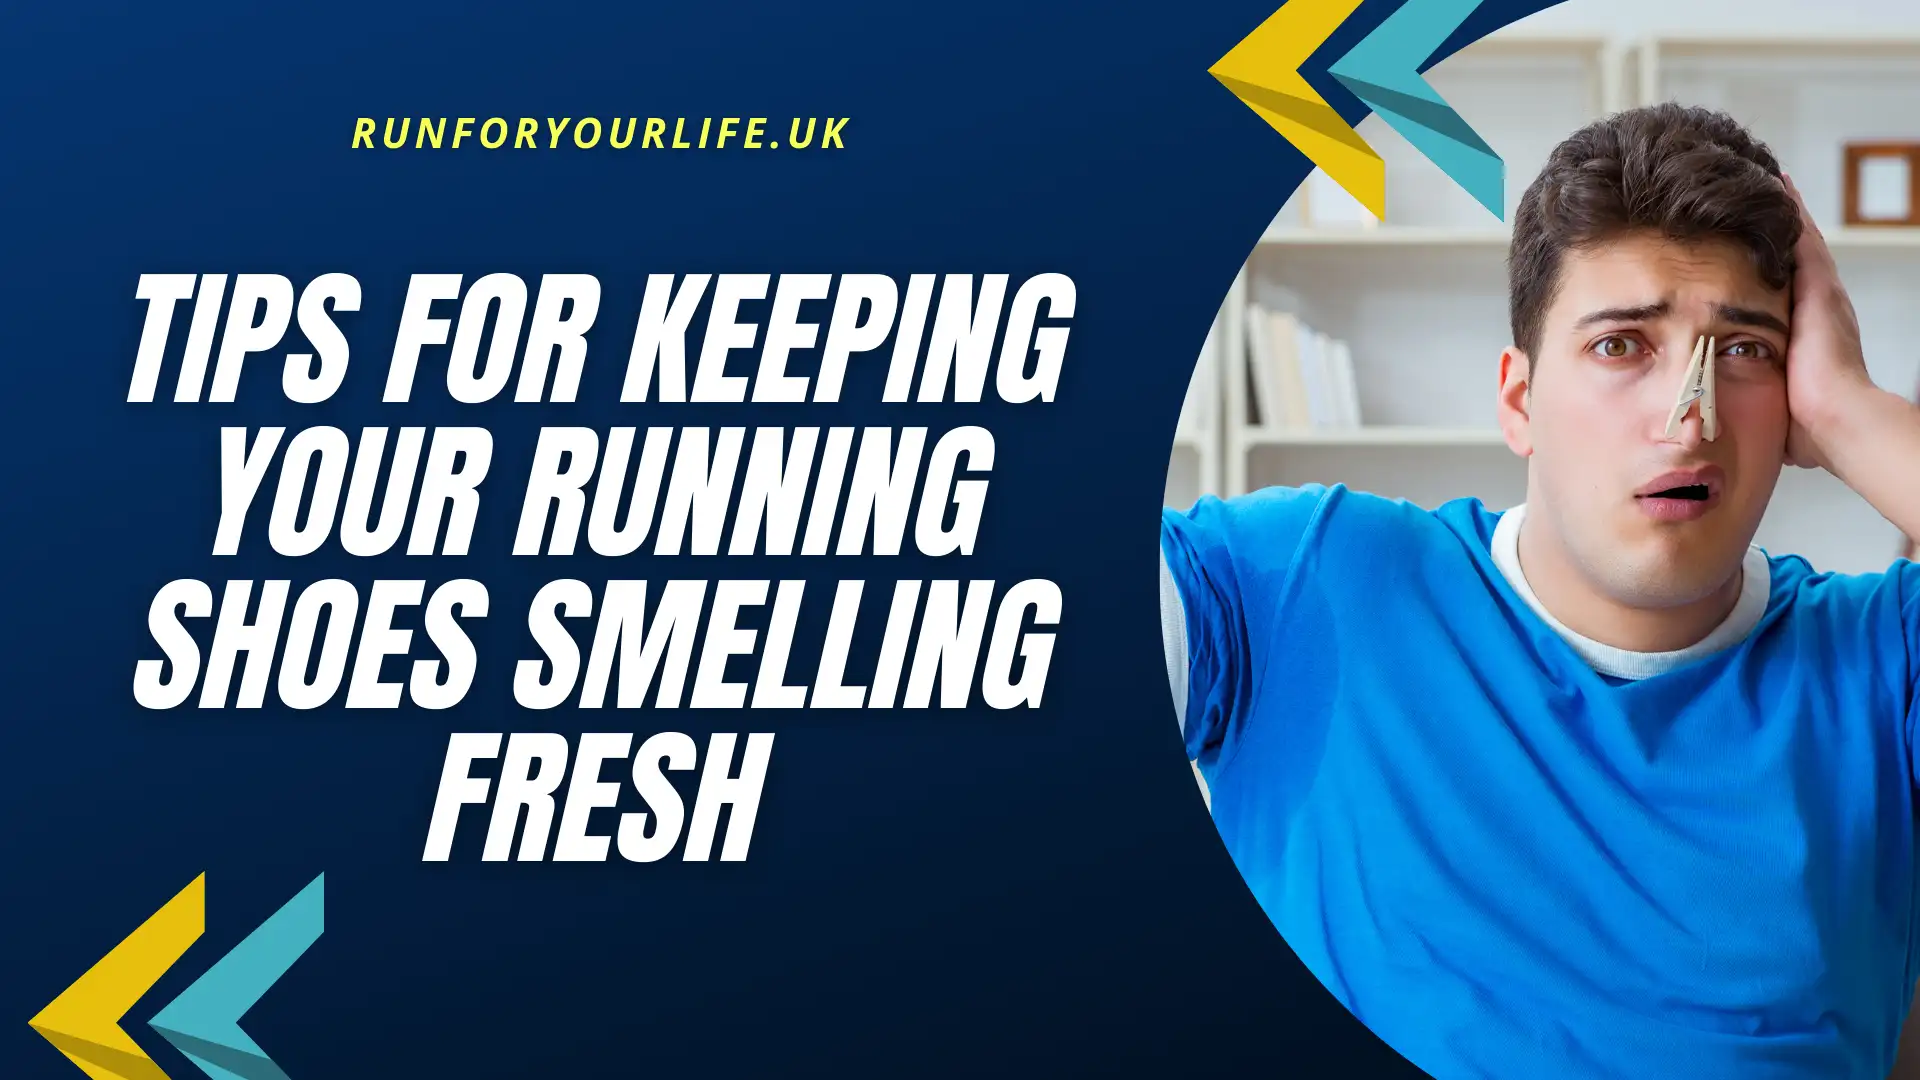 Tips for keeping your running shoes smelling fresh